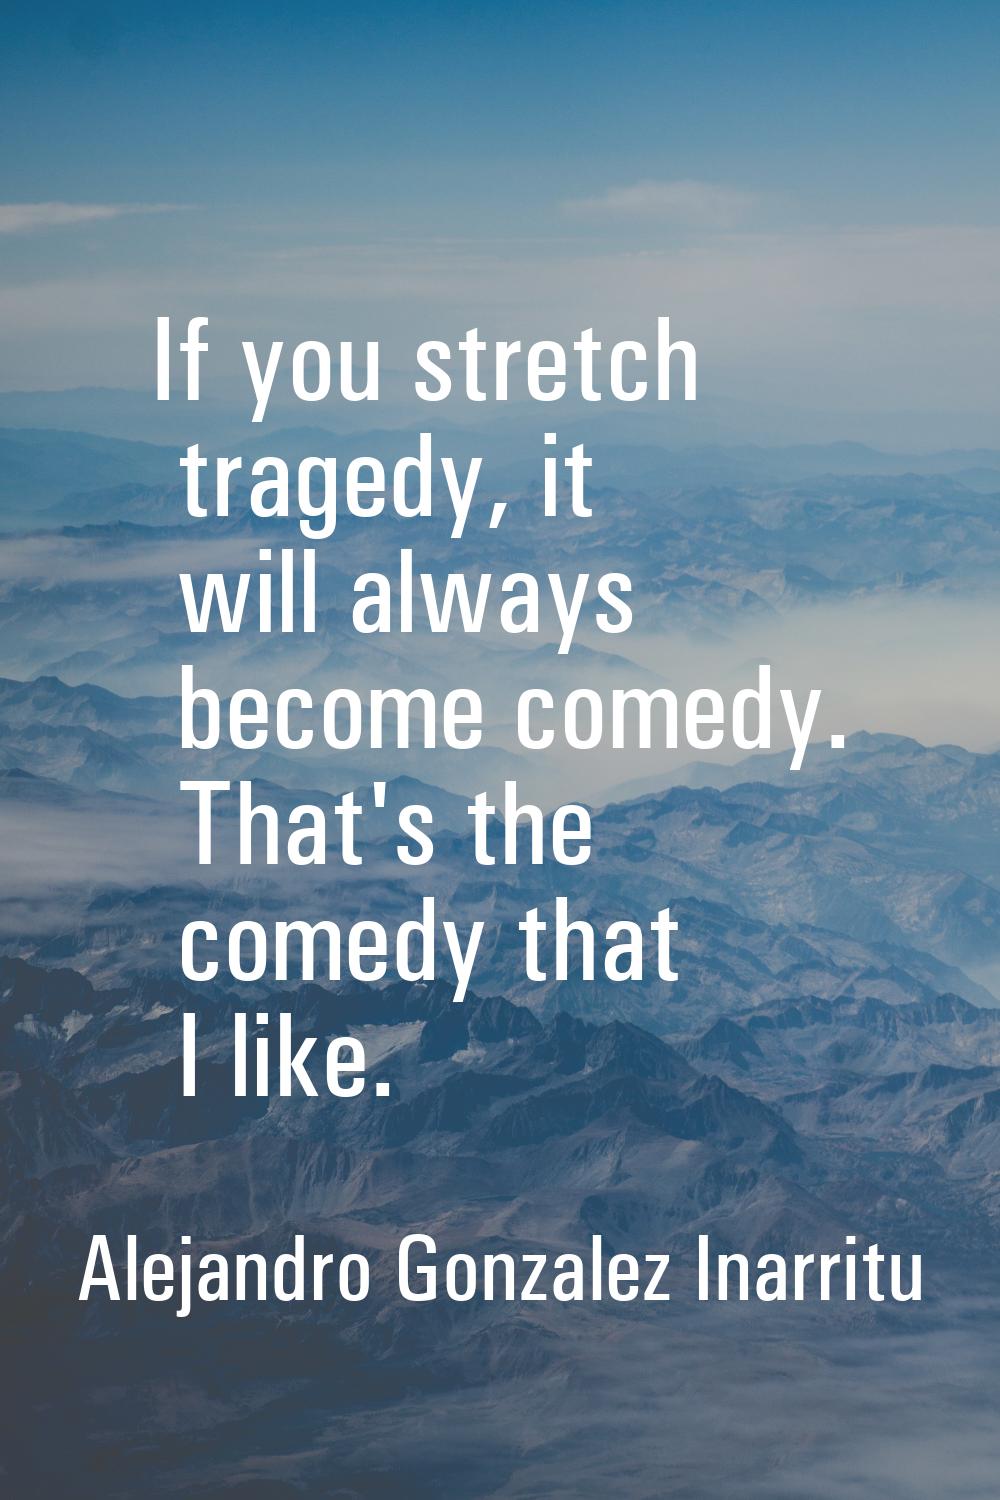 If you stretch tragedy, it will always become comedy. That's the comedy that I like.